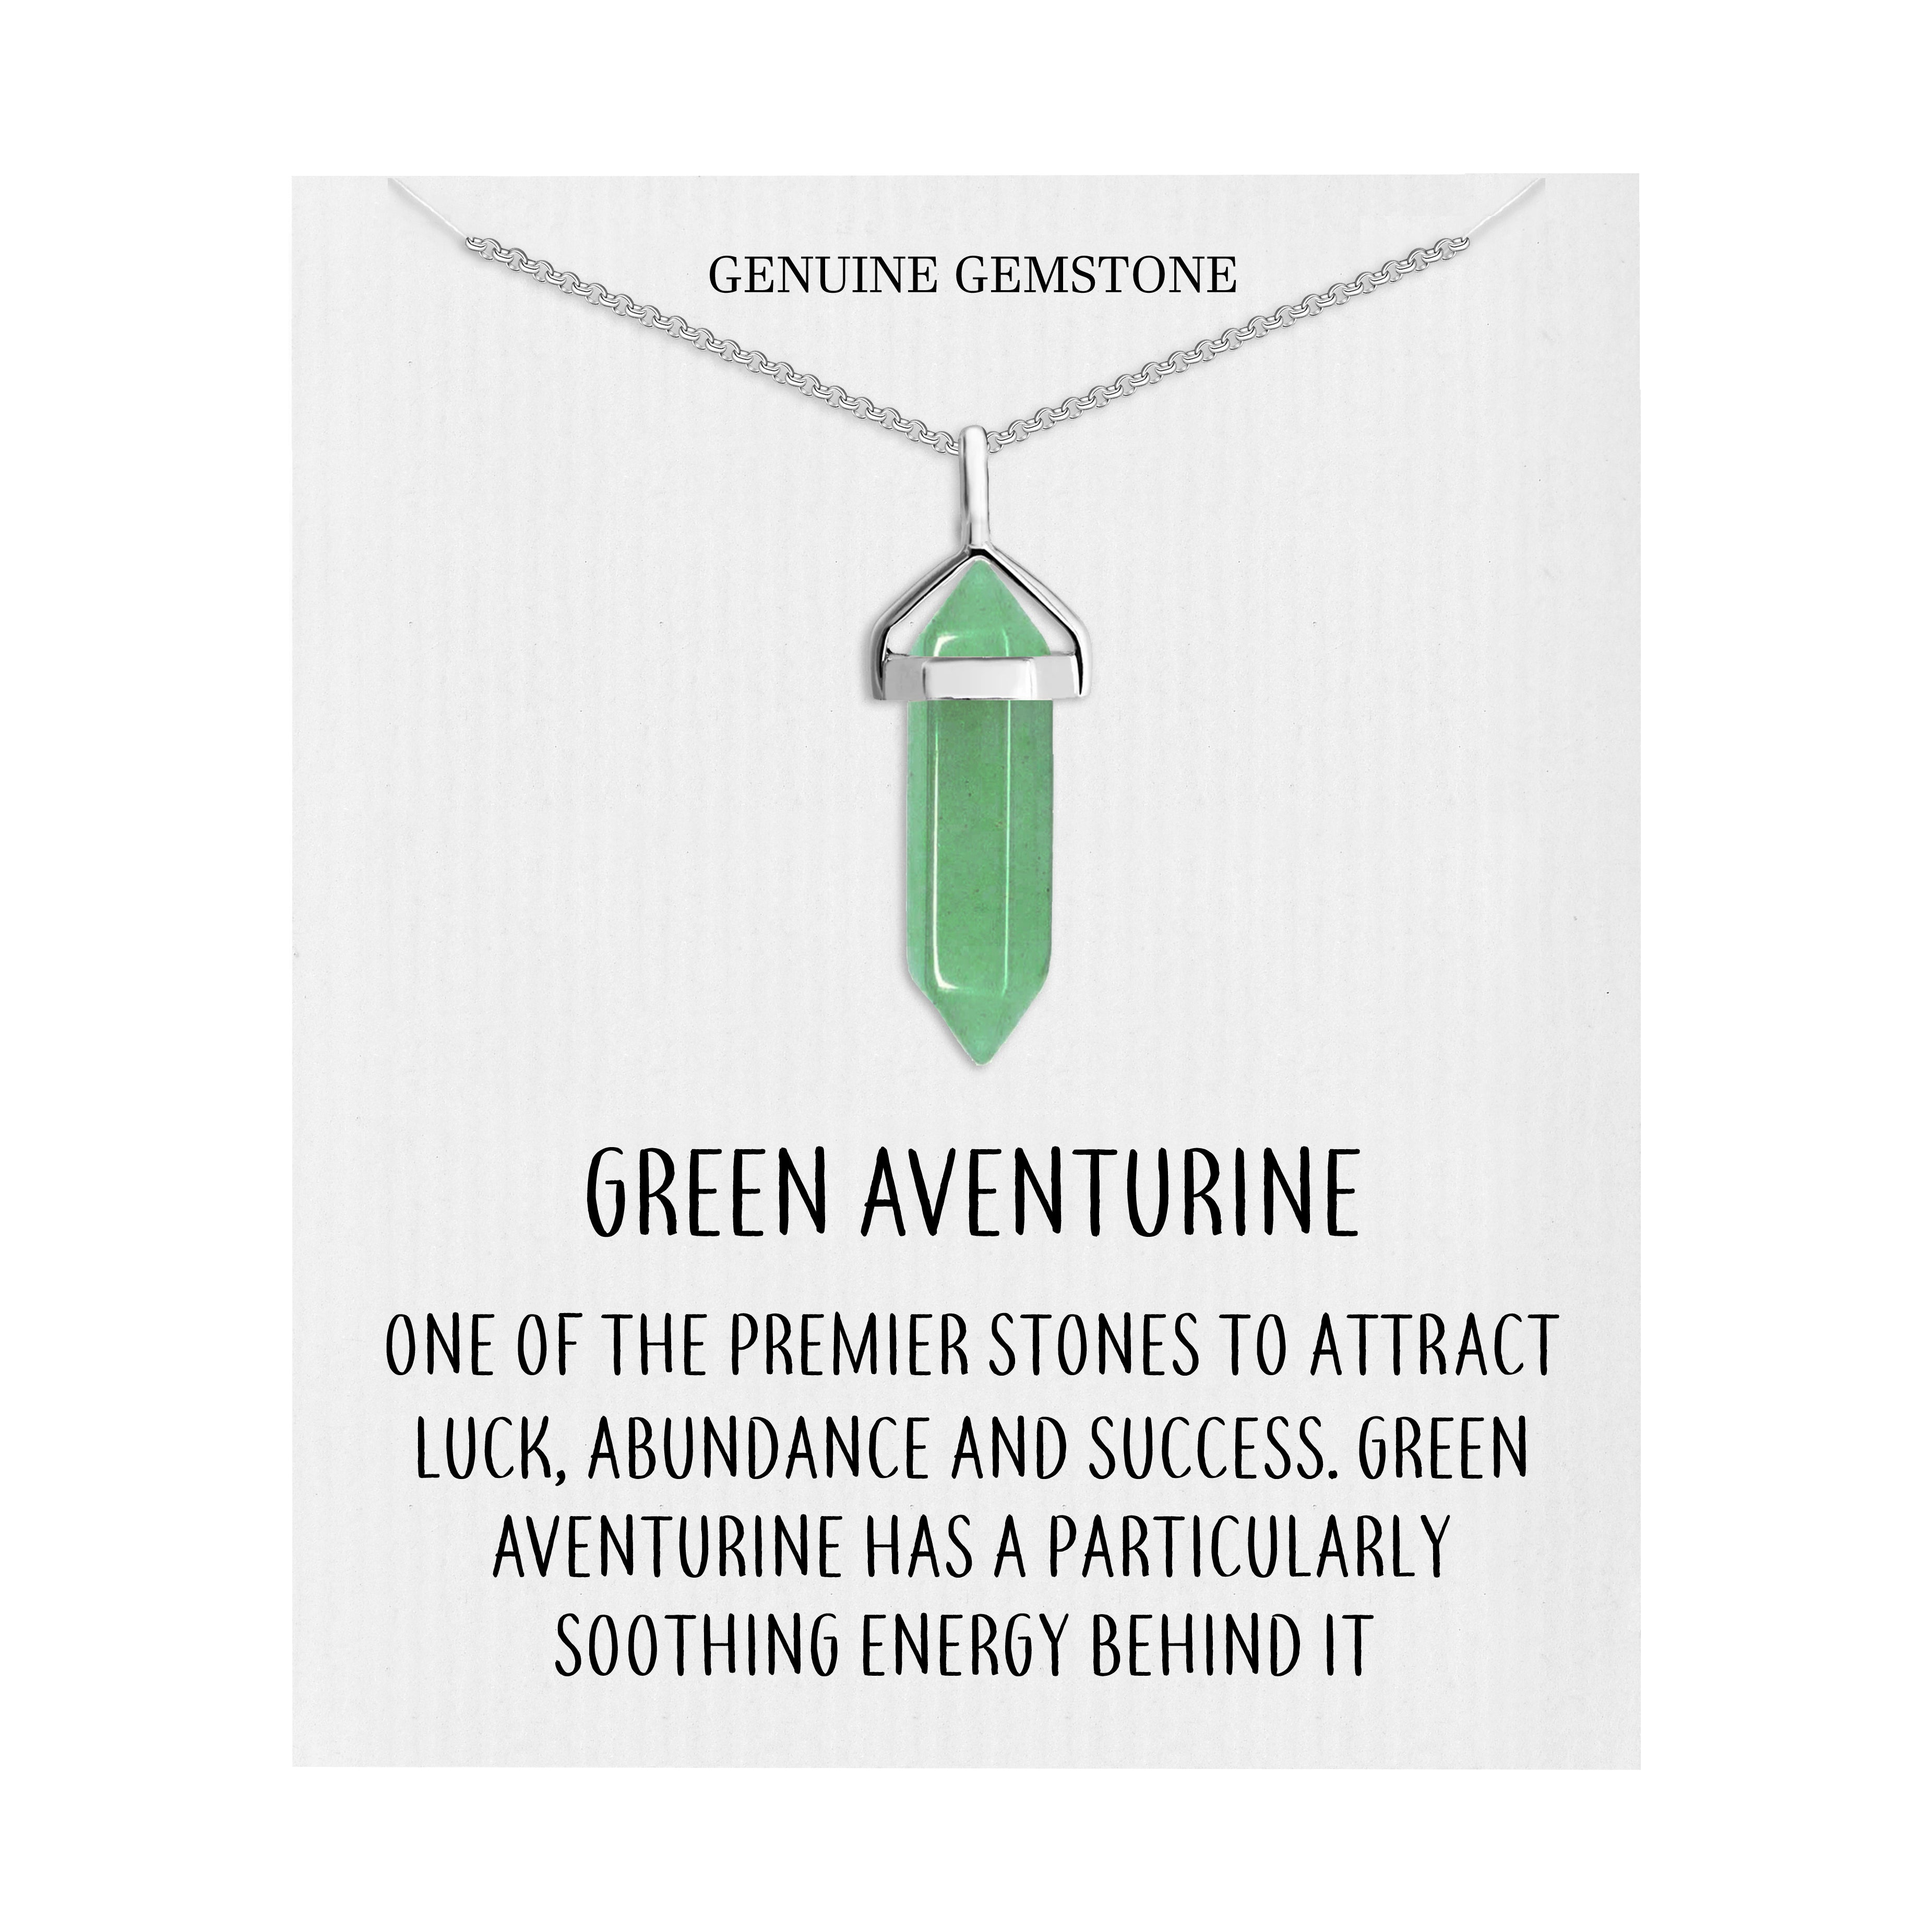 Green Aventurine Gemstone Necklace with Quote Card